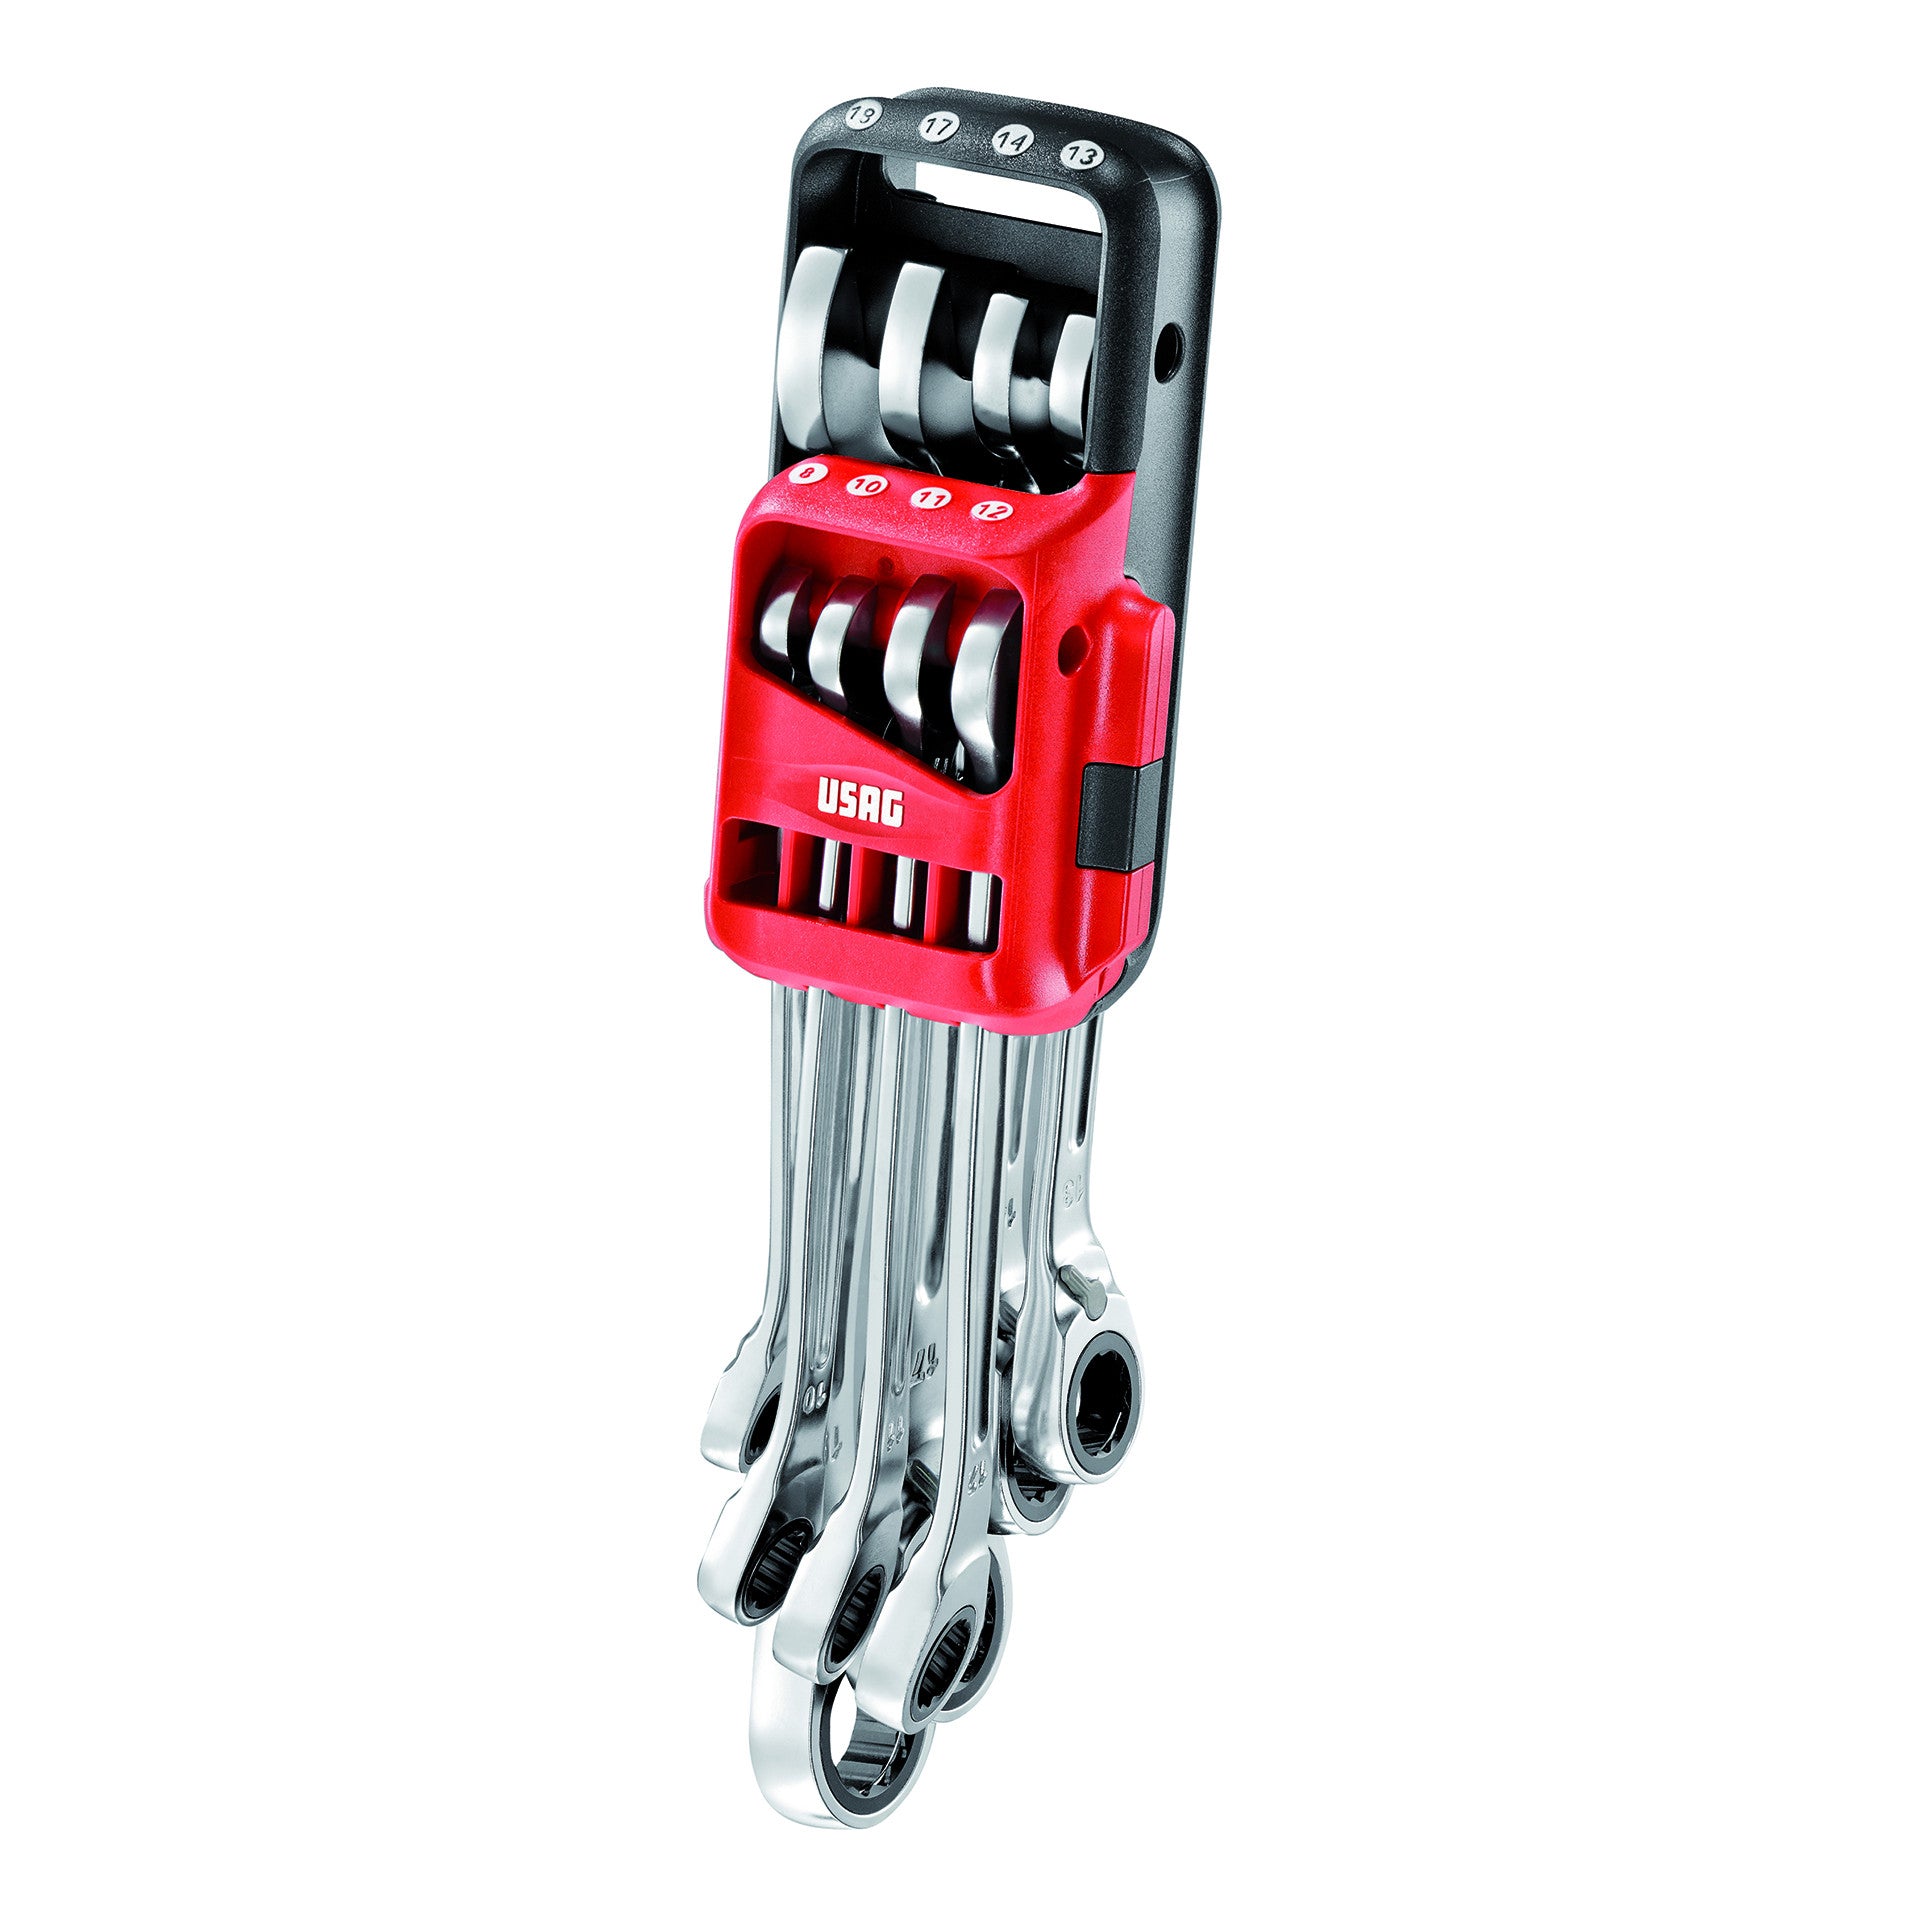 Set of 8 combination ratchet wrenches with retaining ring - Usag 285 KA/DS8